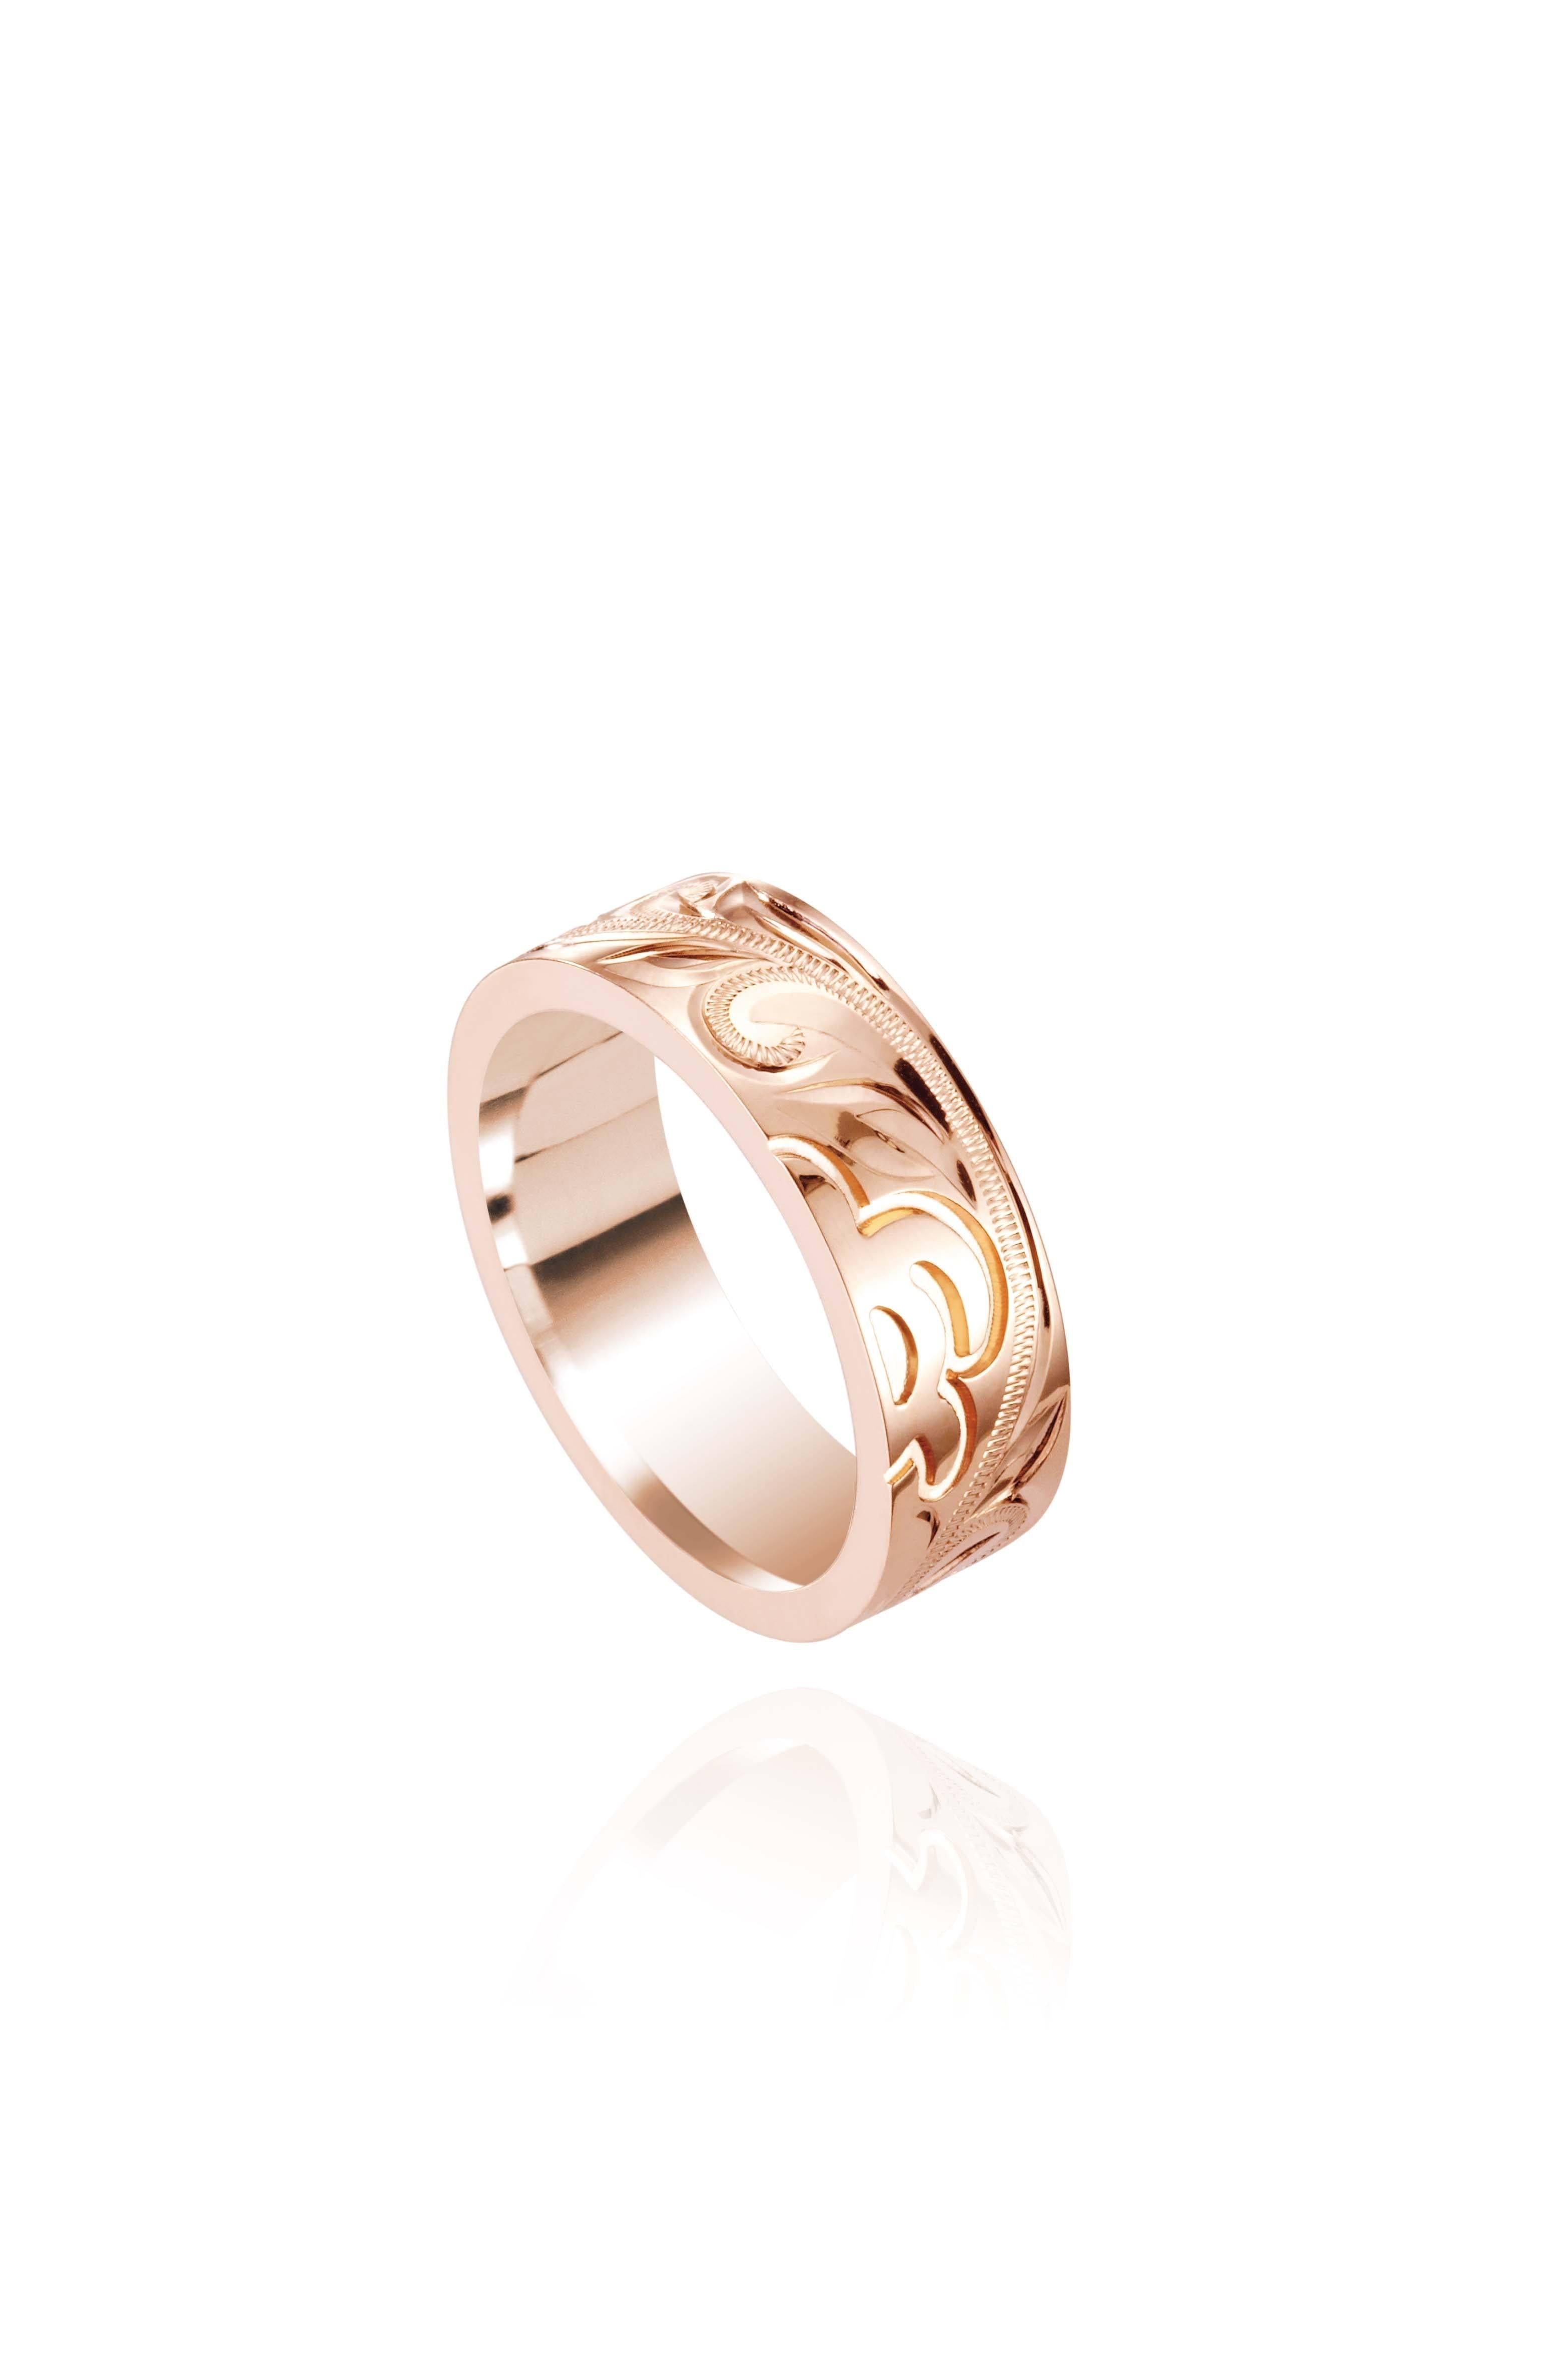 The picture shows a 14K rose gold sea turtle 6 mm Naupaka ring.